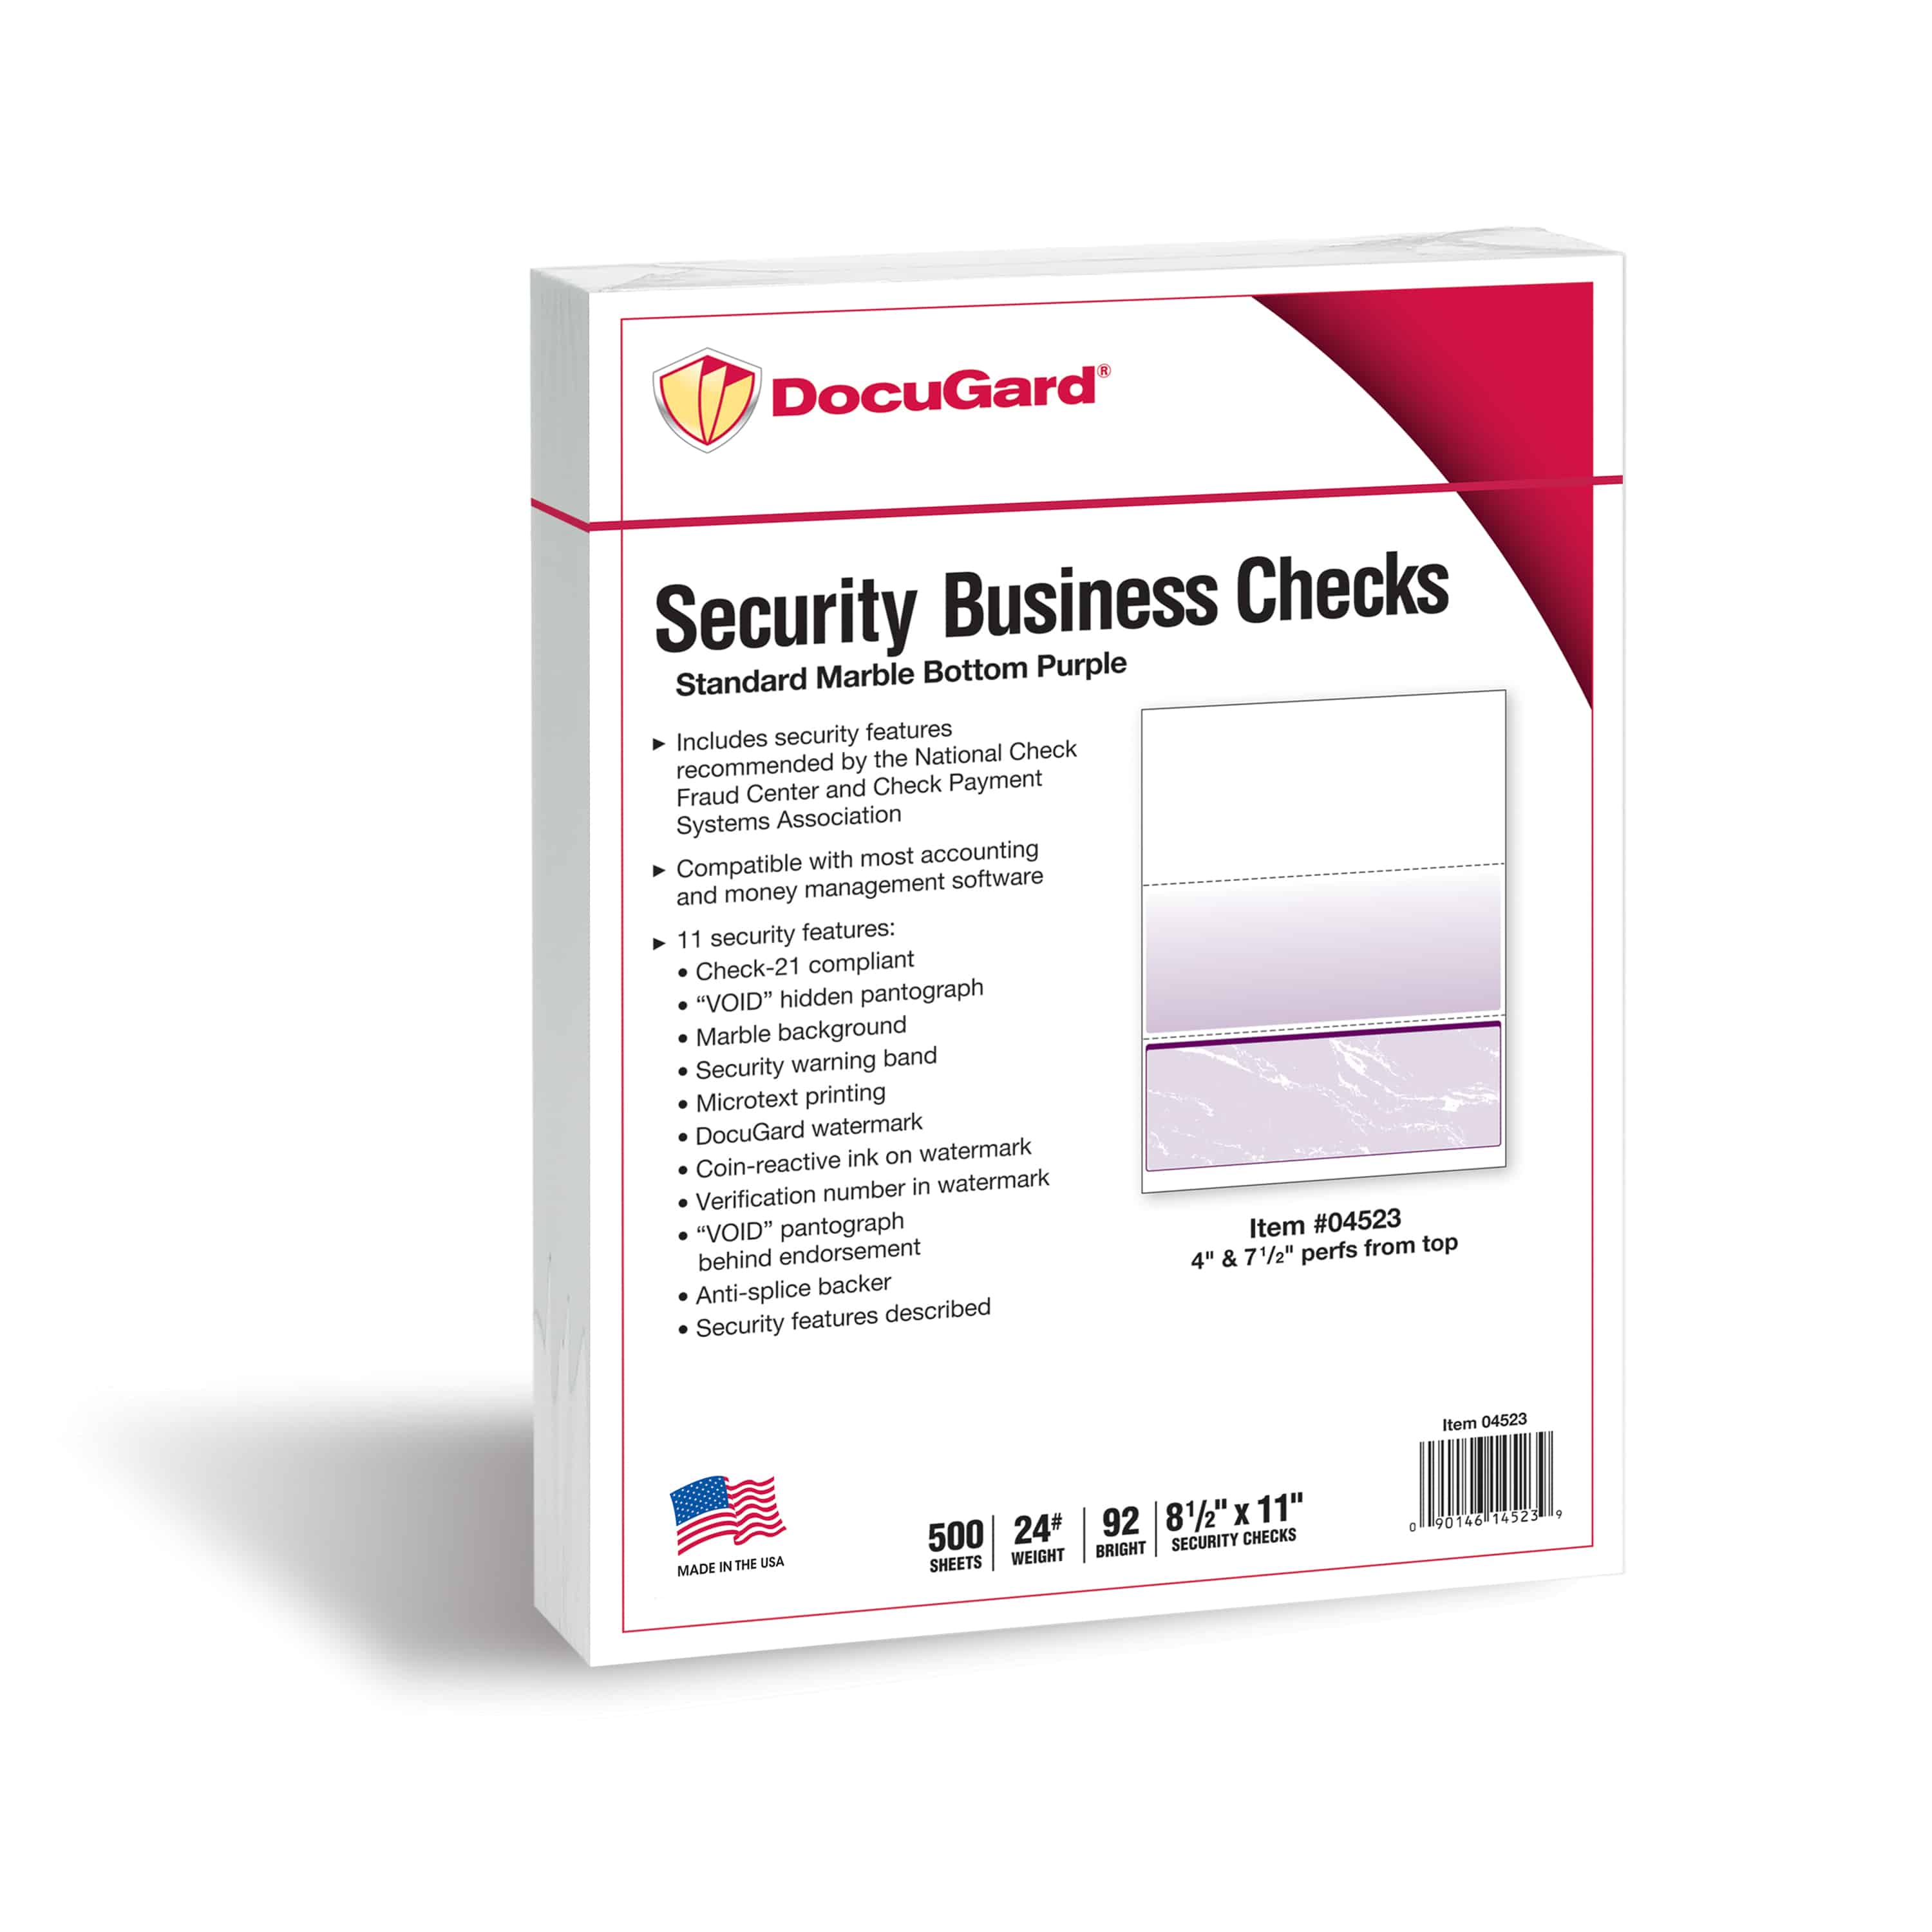 DocuGard, security paper, tamper resistant, fraud protection, business checks, check fraud center, security features